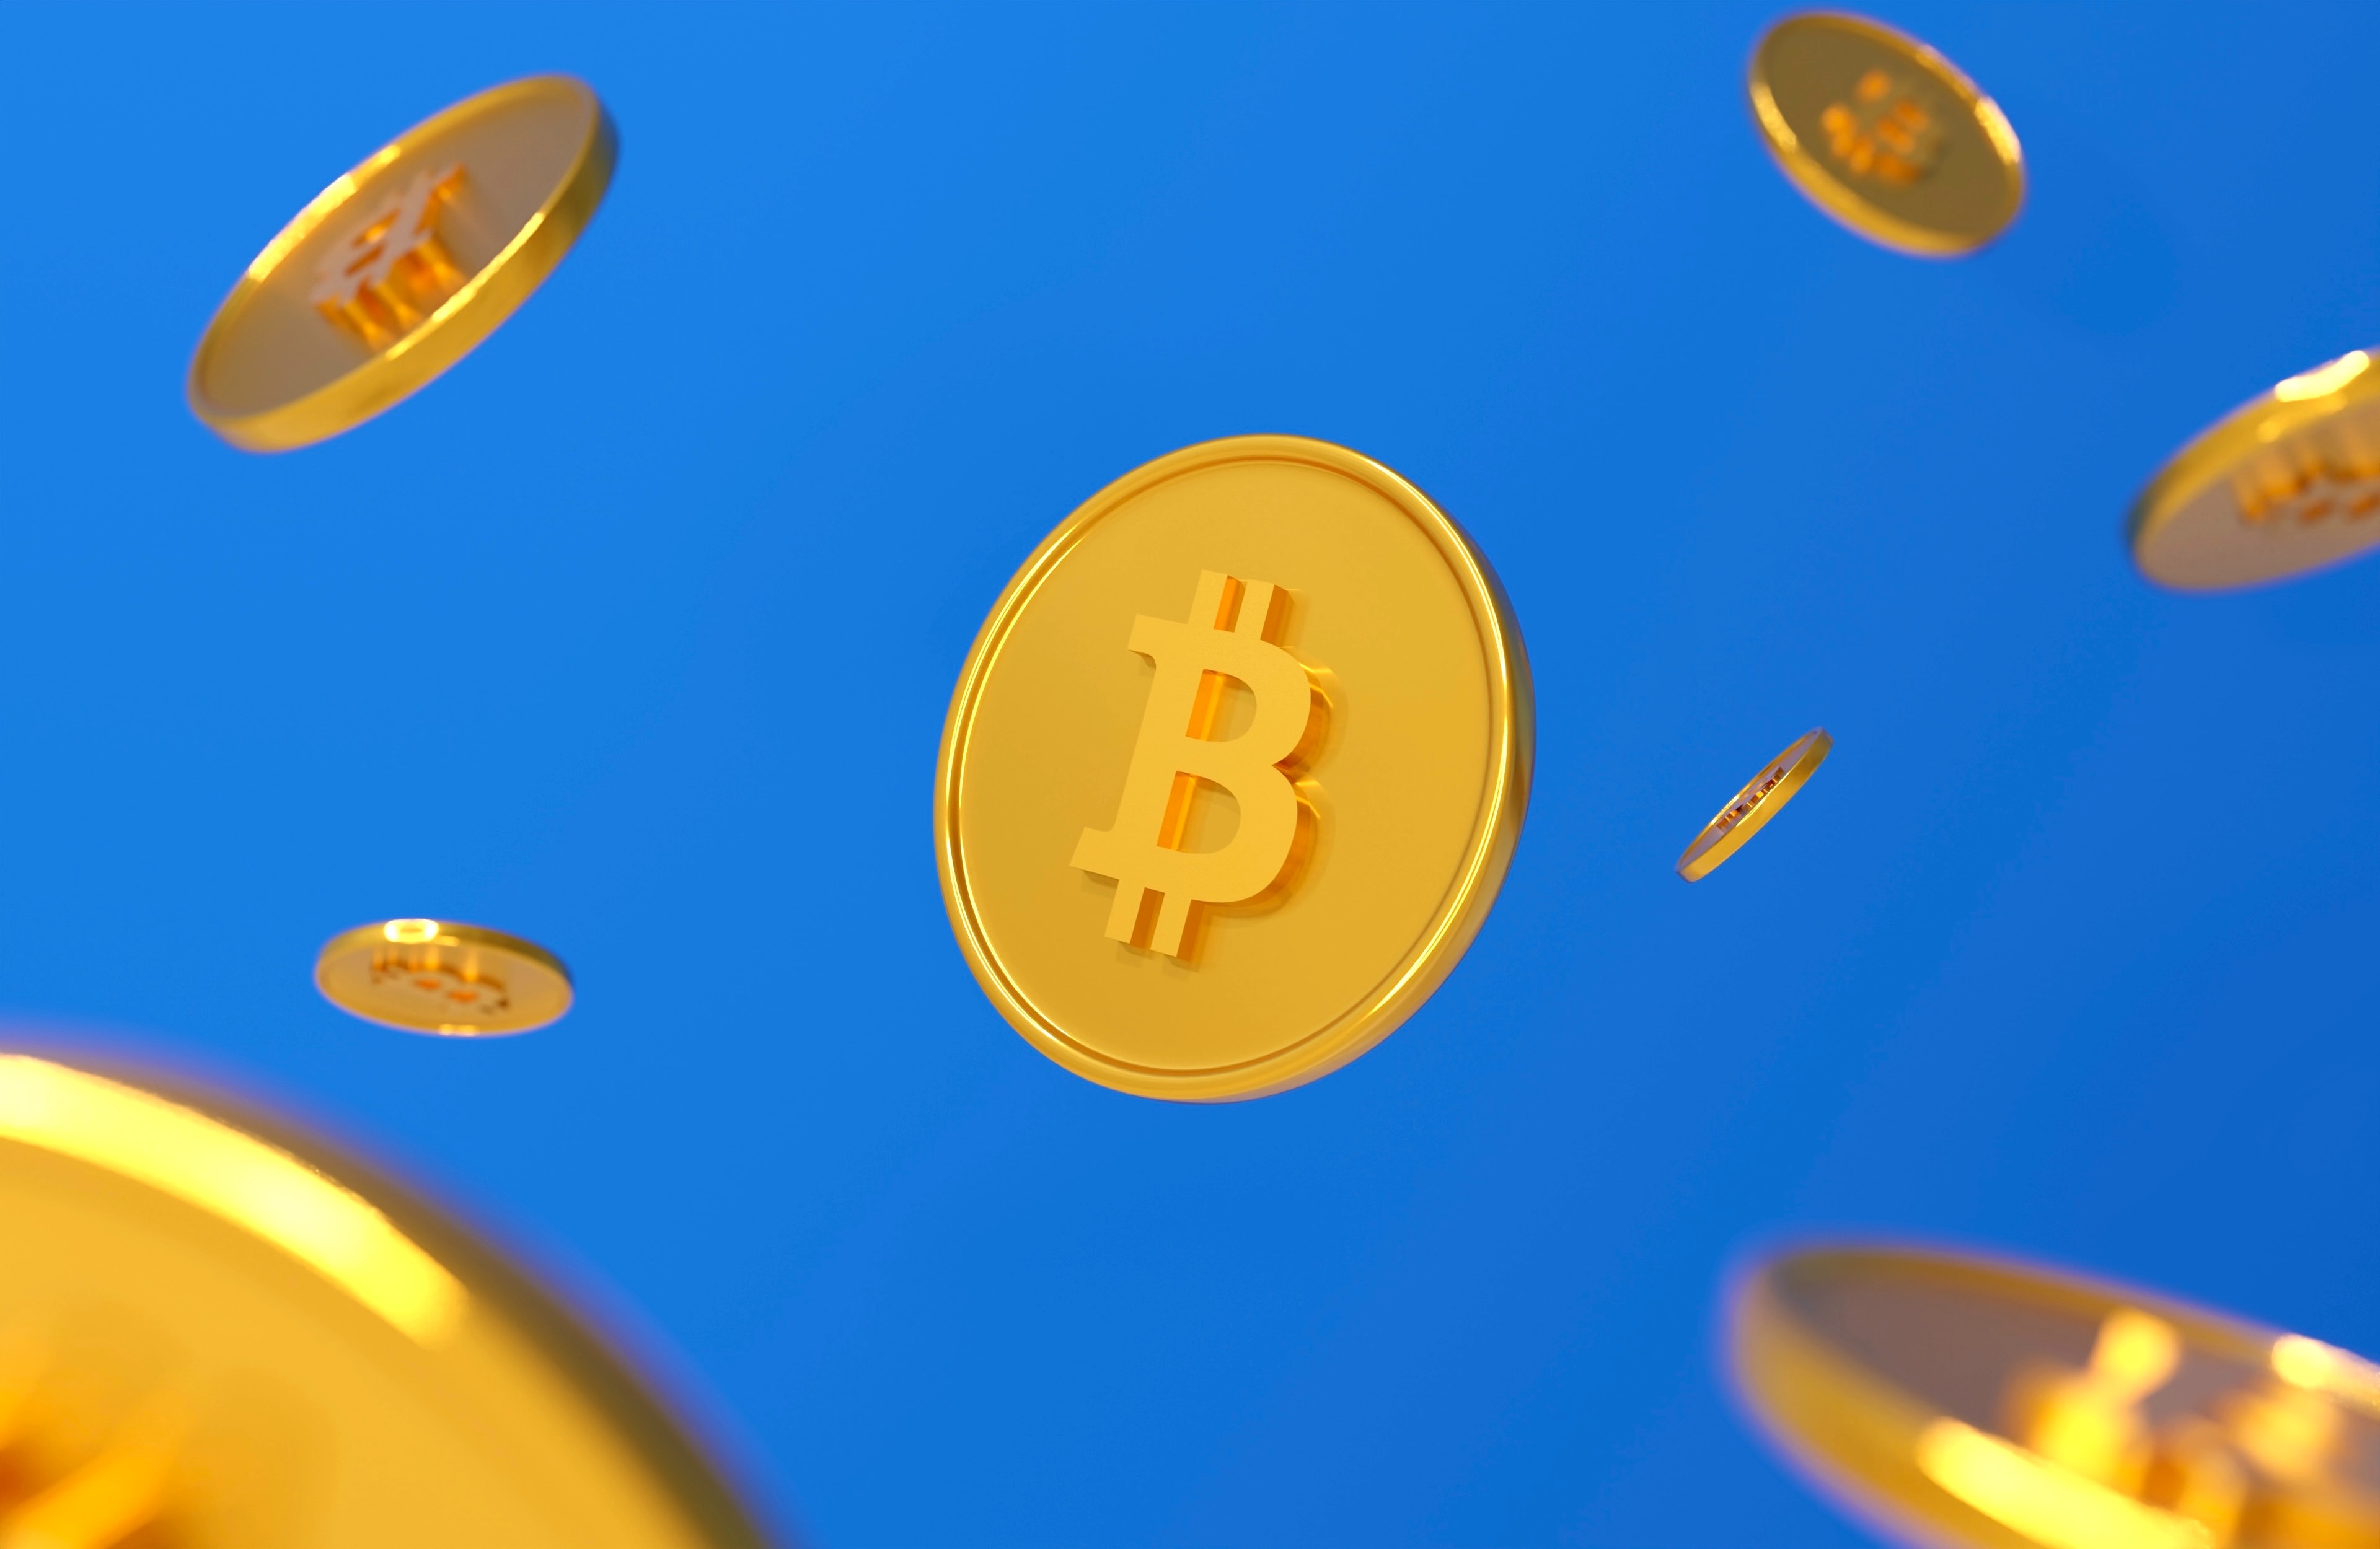 Bitcoin Trading Volume Nears One-Year Highs As Volatile Market Continues